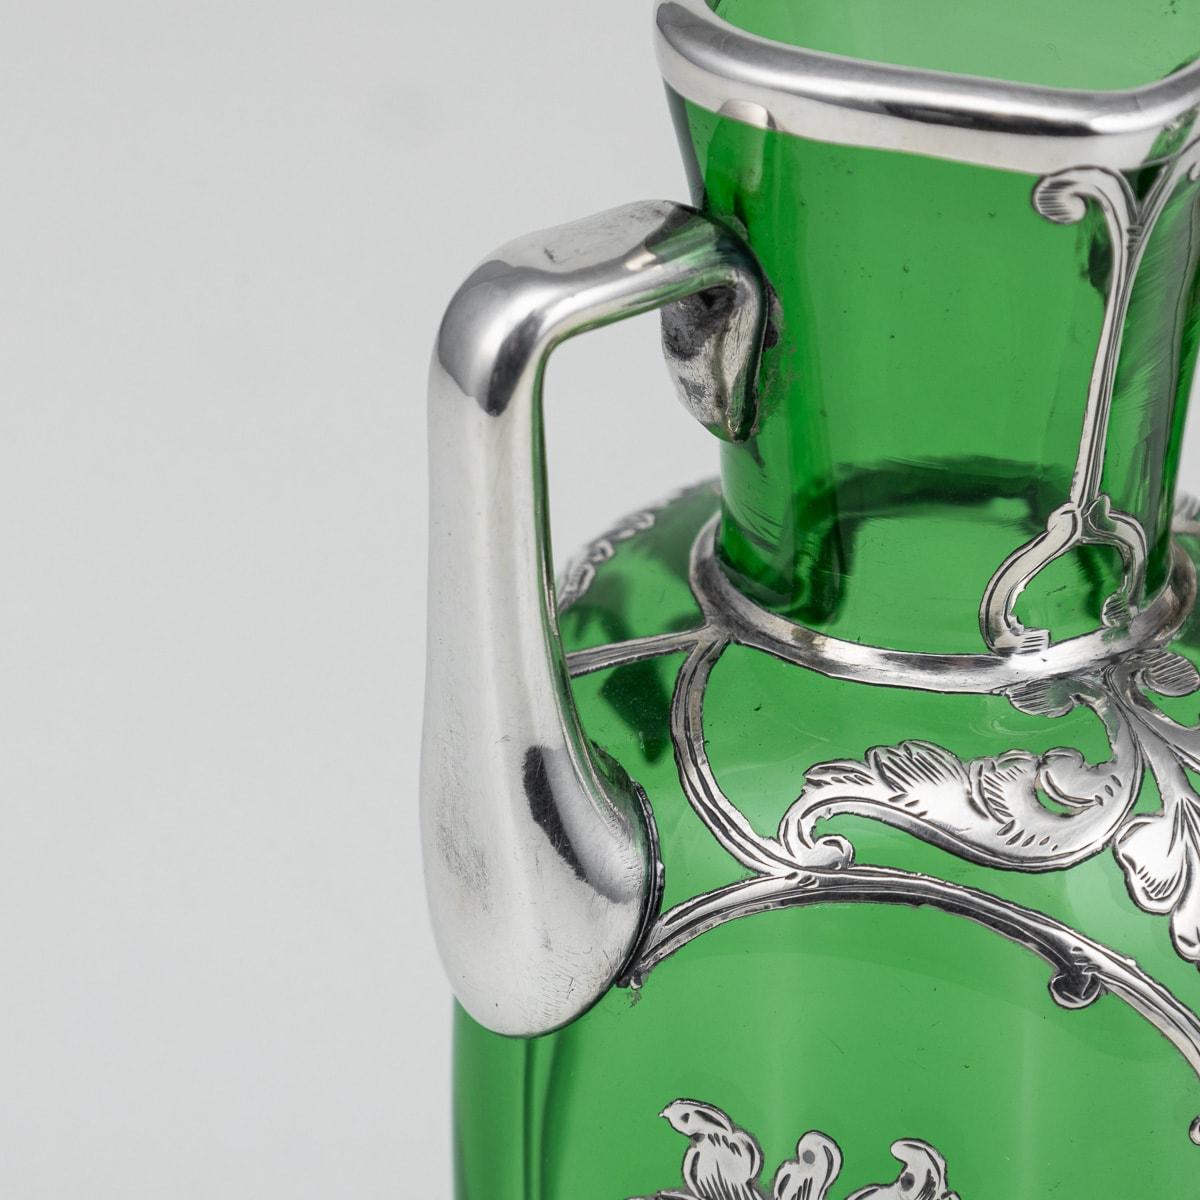 20th Century American Pair Of Green Glass Vases With Silver Overlay c.1920 For Sale 3